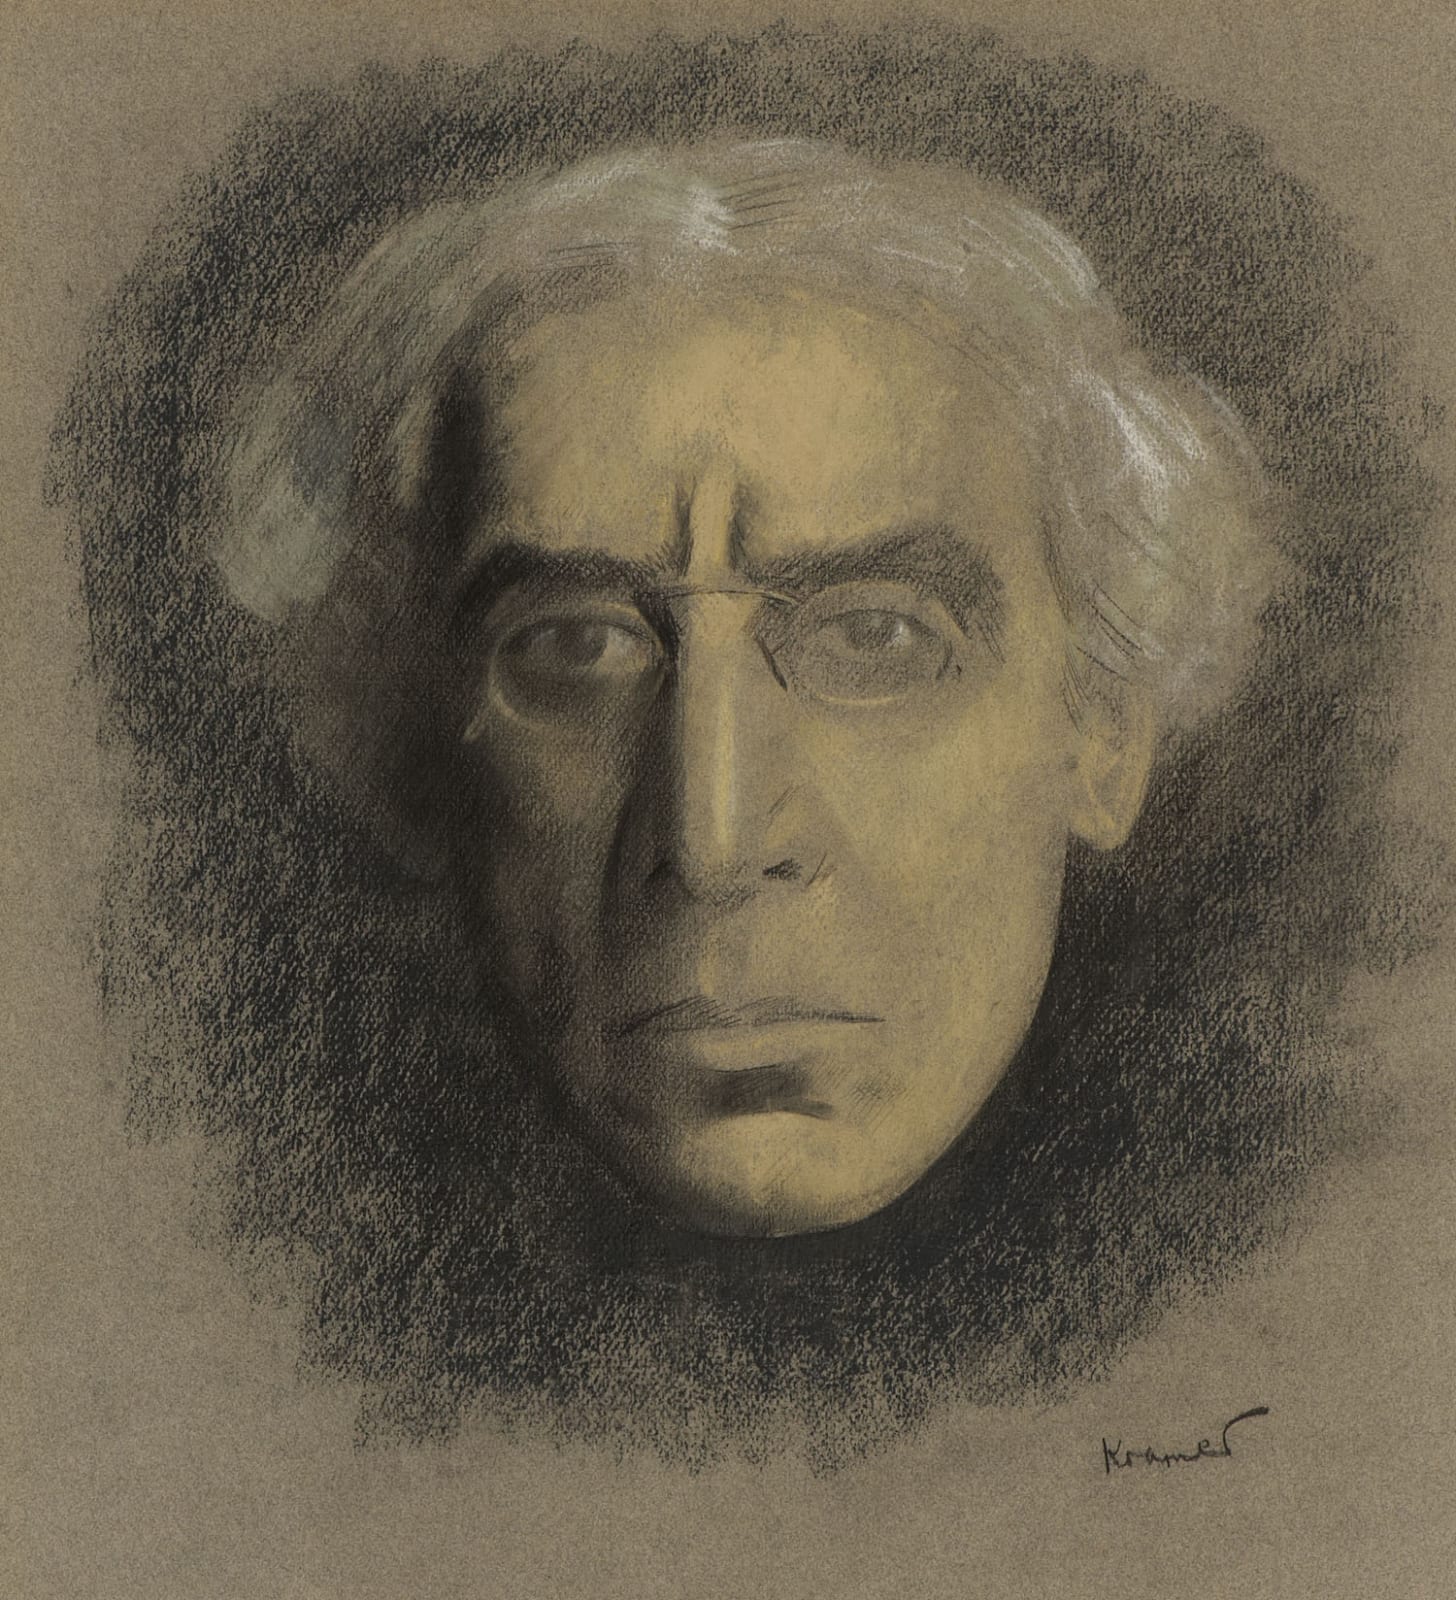 Jacob Kramer (1892-1962) Portrait of Israel Zangwill 1925 Charcoal and white chalk on paper 47 x 43 cm Ben Uri Collection © The William Roberts Society, London